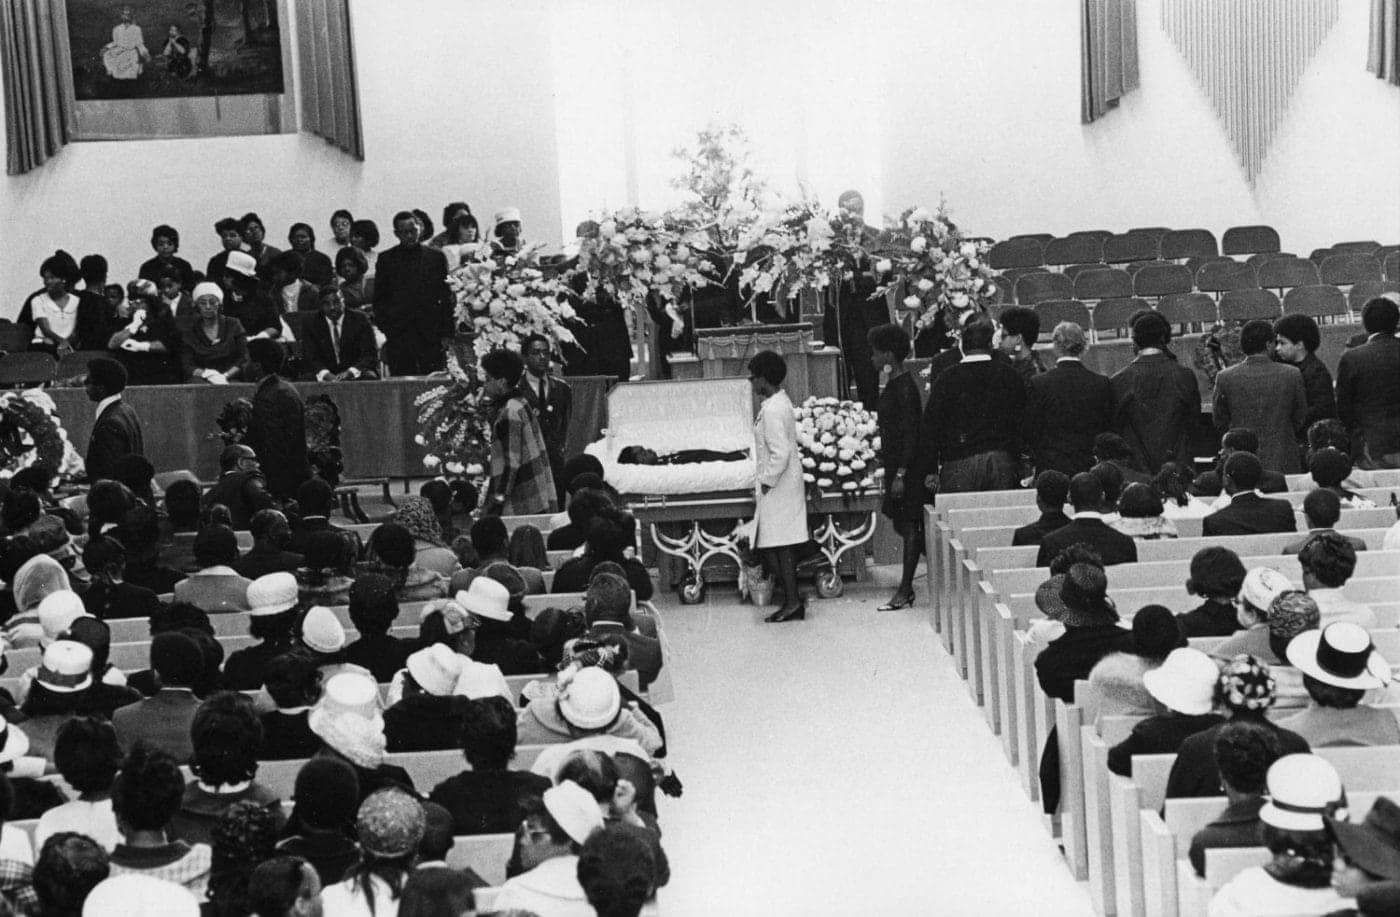 Bobby-Hutton-Funeral-Oakland-1968-1-1400x917, Jeffrey Blankfort: photographing the Black community and the Panther Party, Featured Photo Gallery World News & Views 